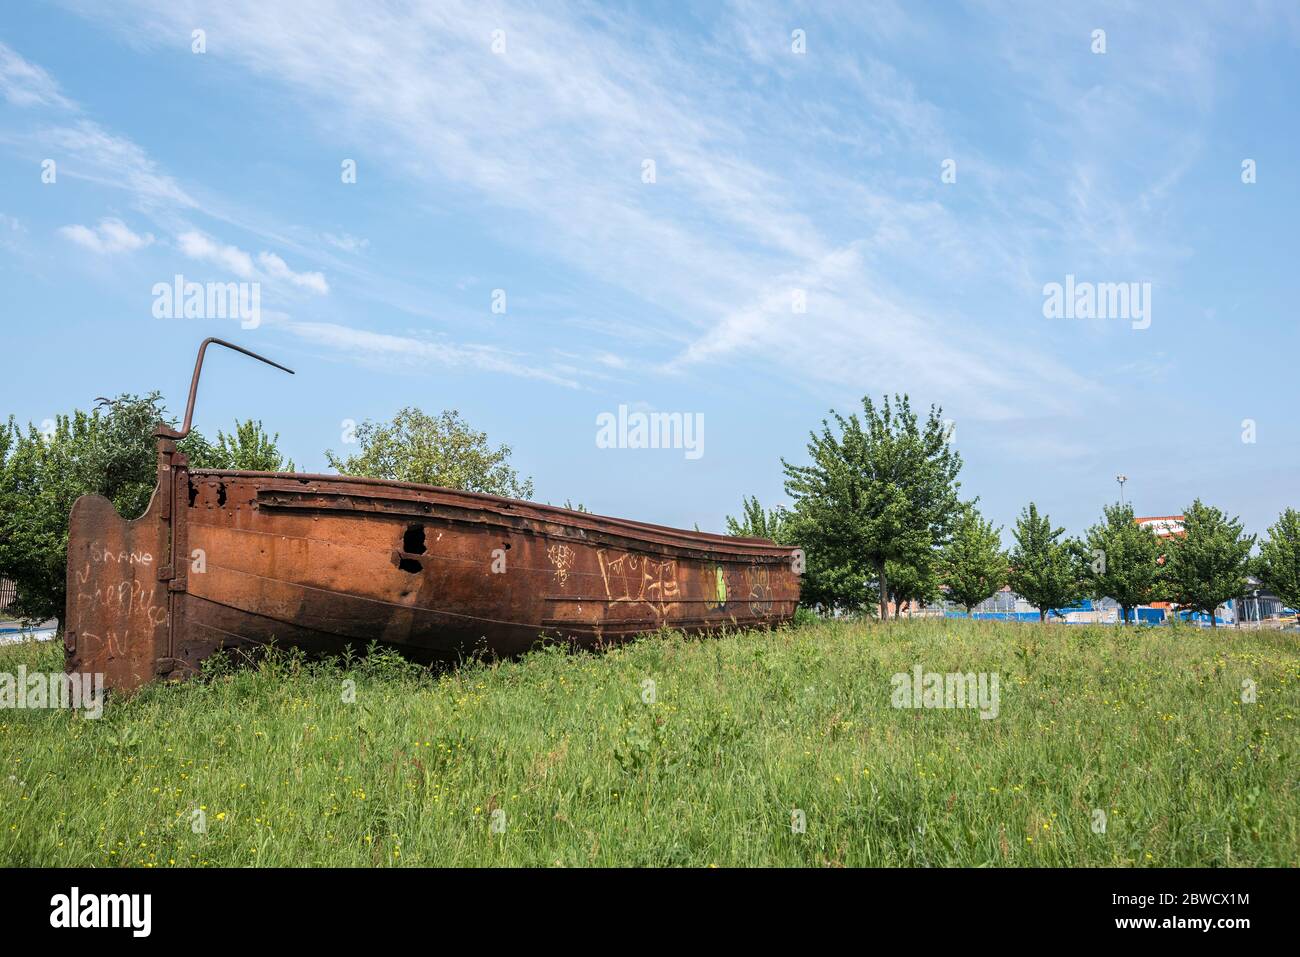 Old rusting industrial Scow boat relic close to Forth & Clyde canal, Glasgow. Stock Photo